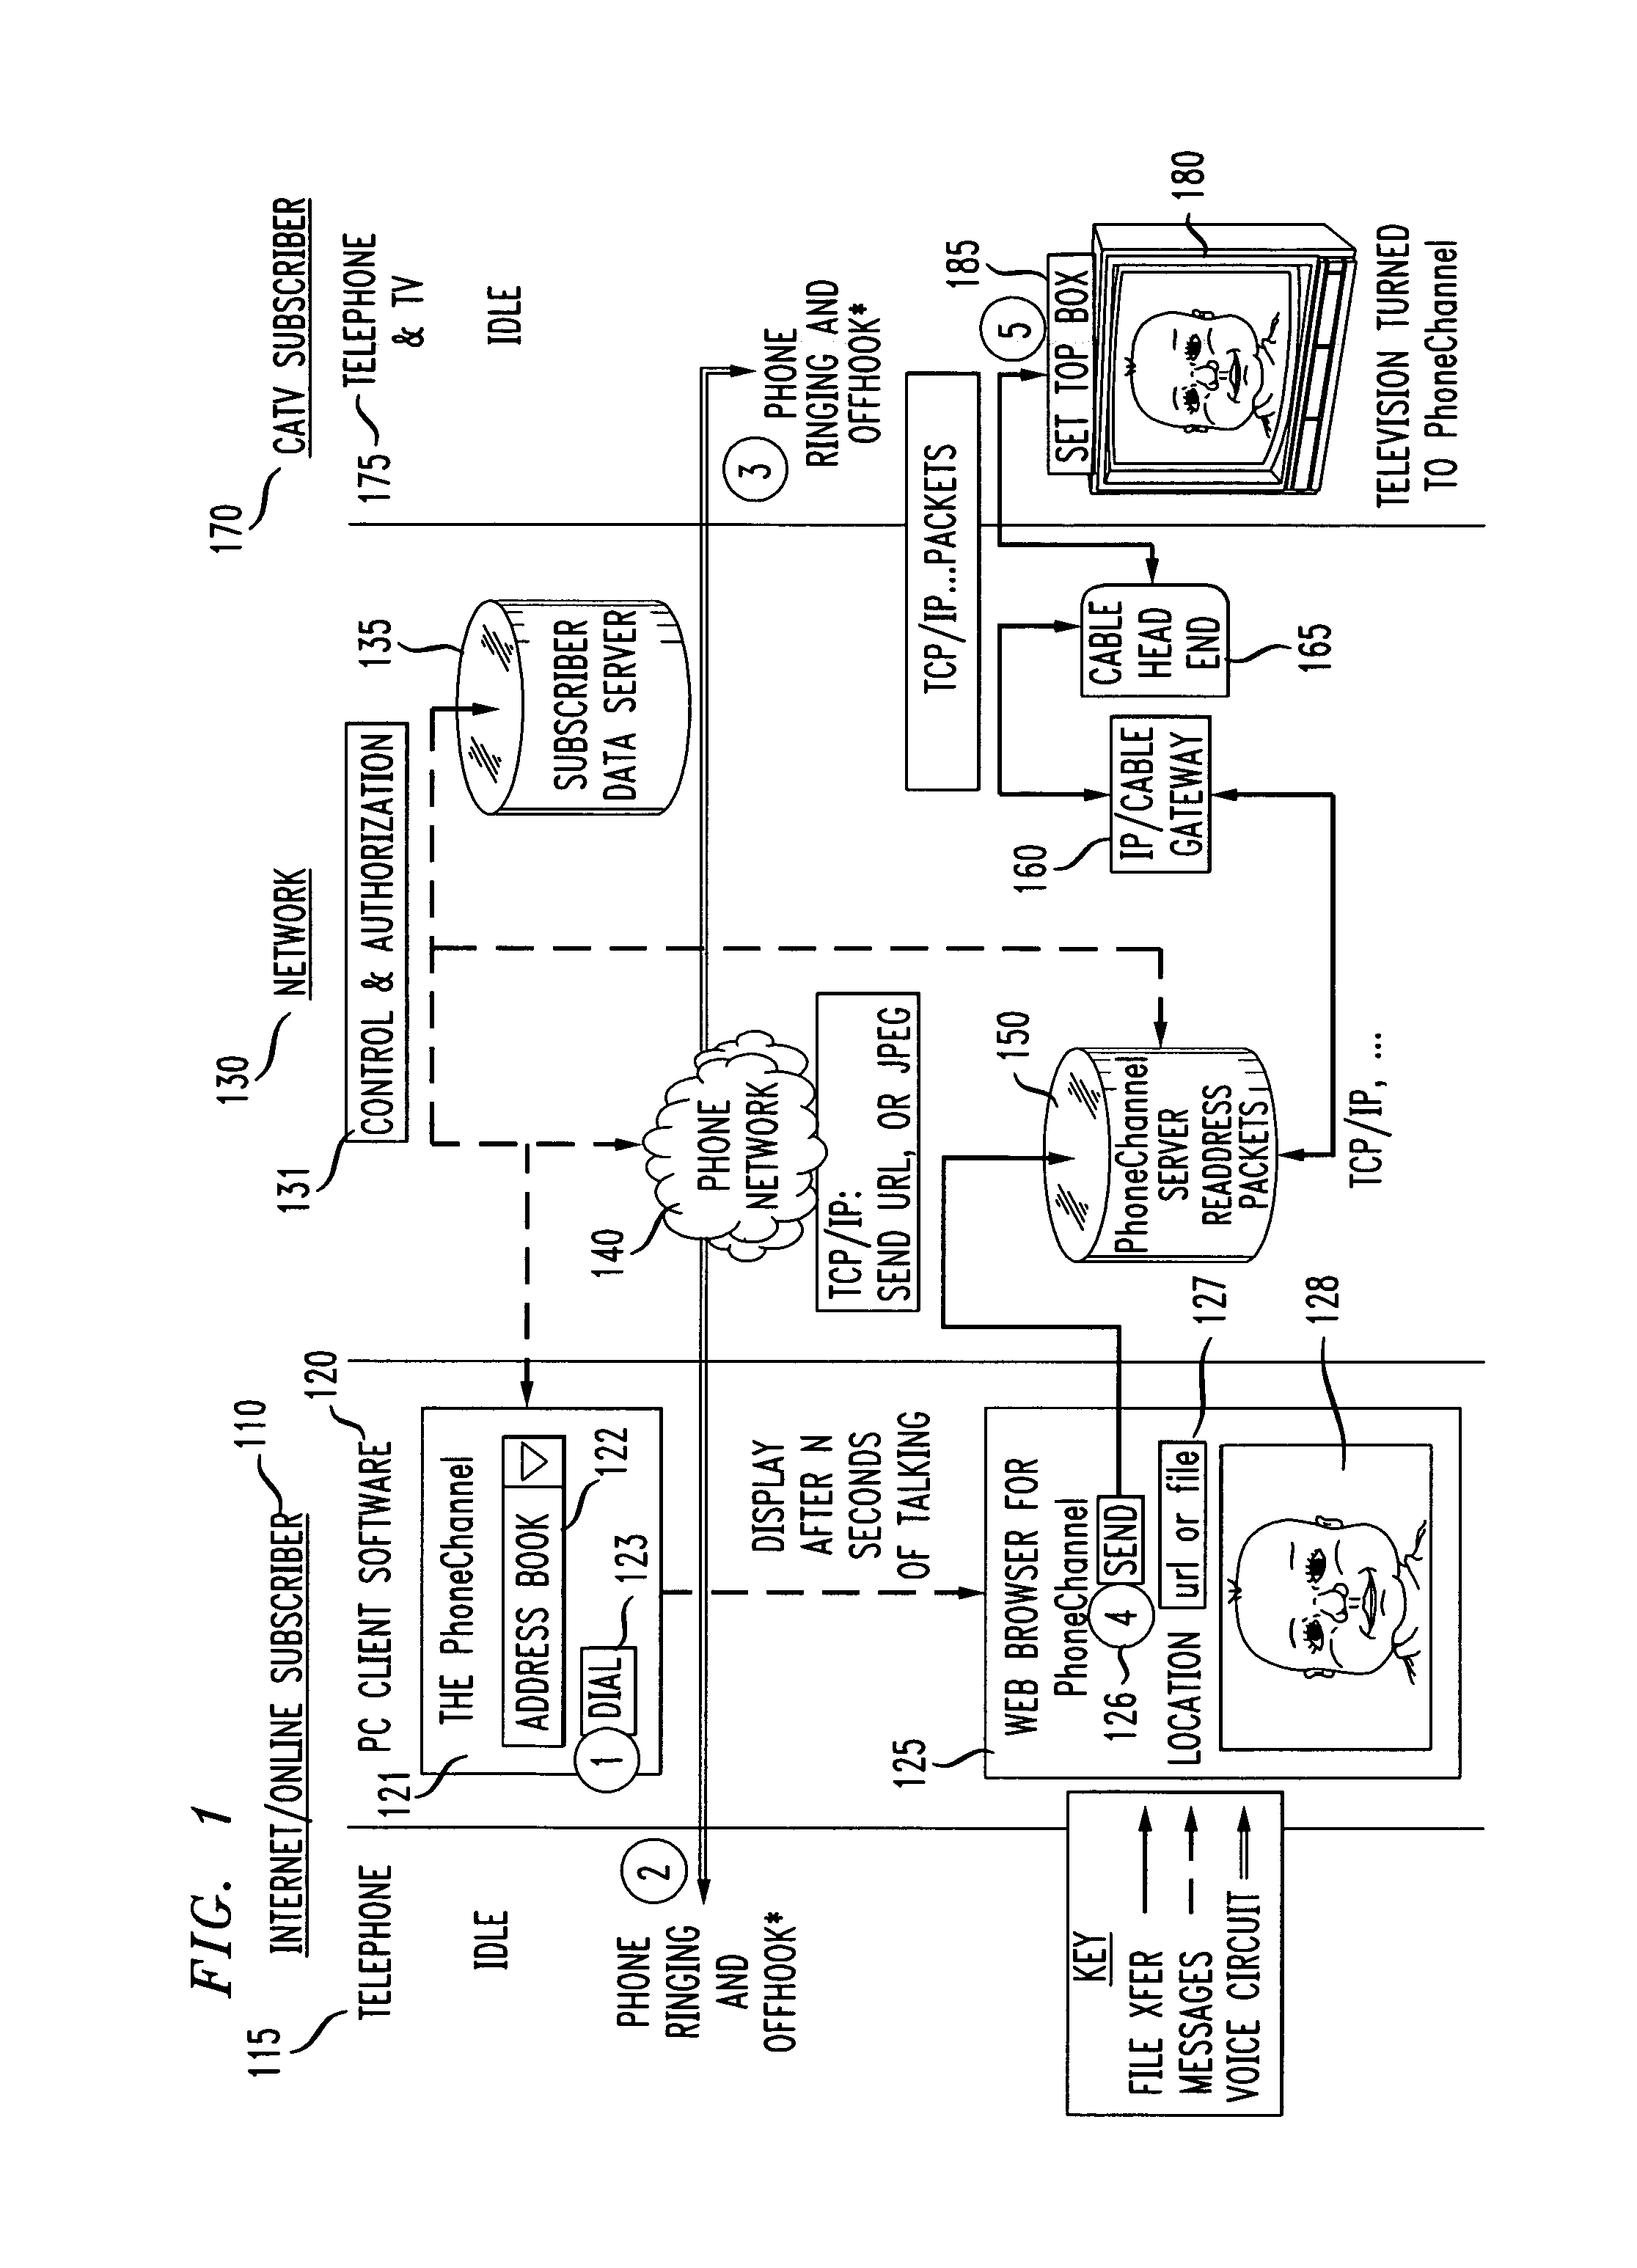 System and method for sharing information between a concierge and guest